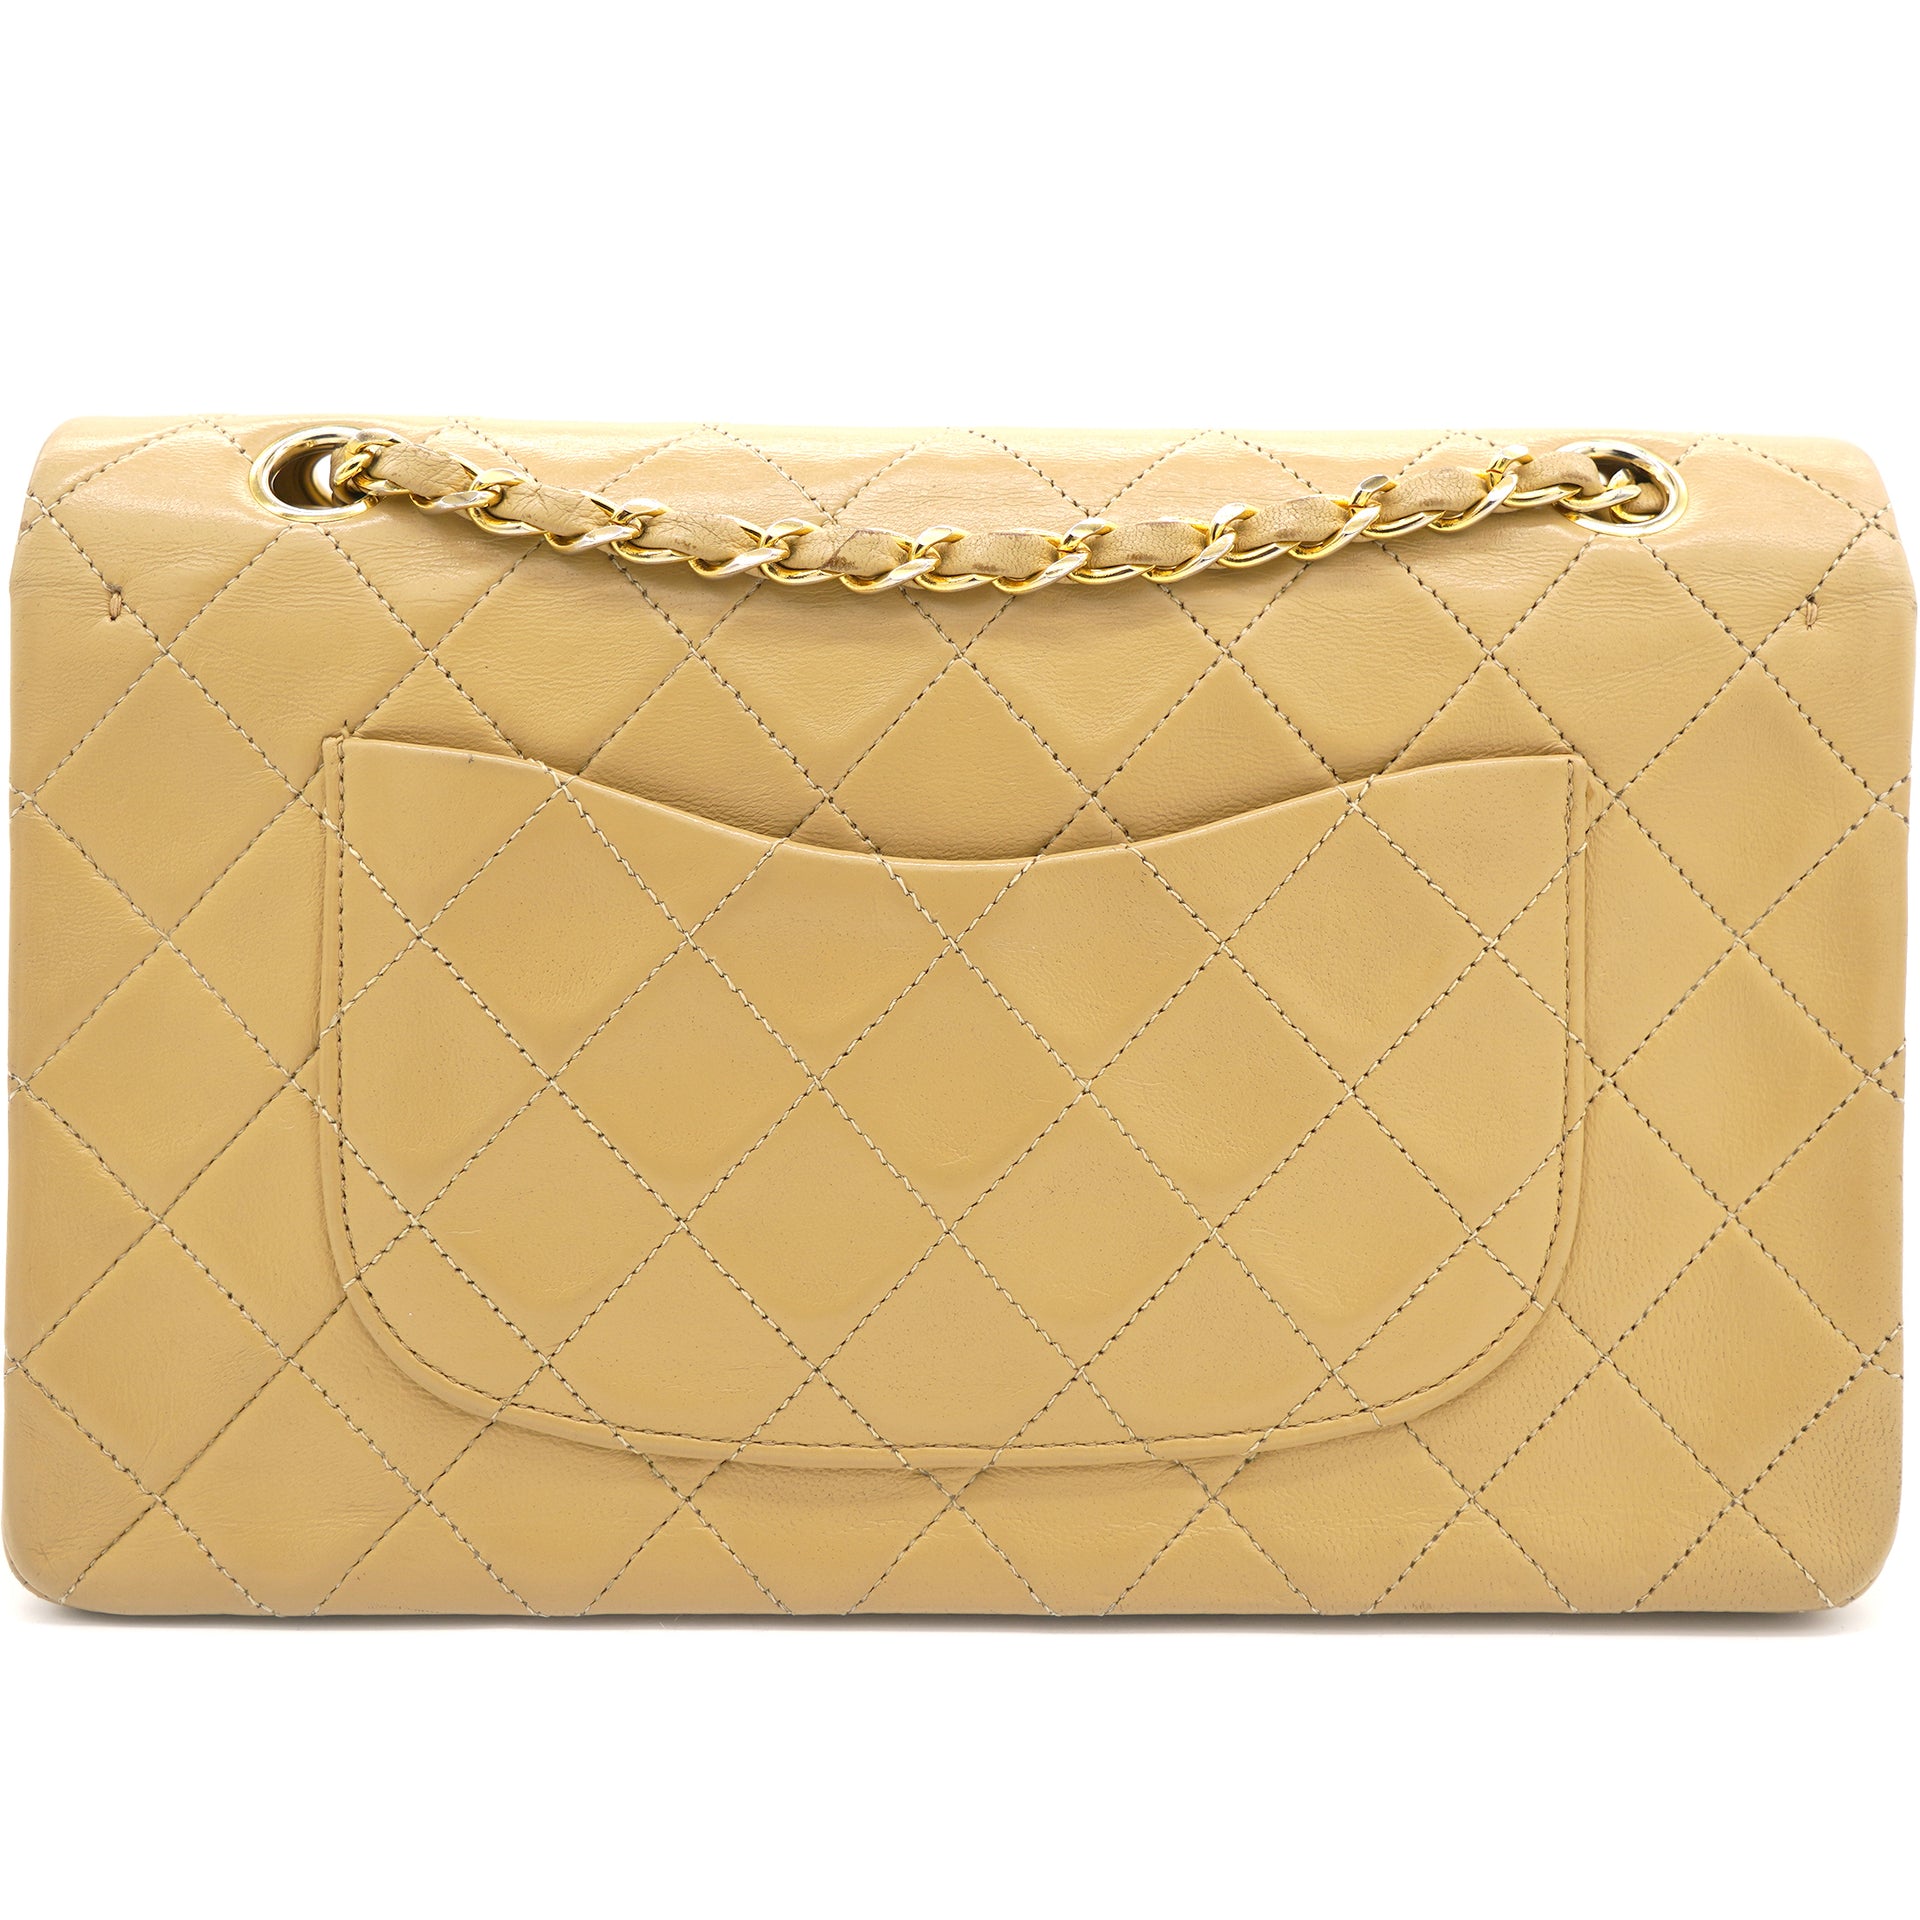 Chanel Beige Quilted Lambskin Leather Medium Classic Vintage